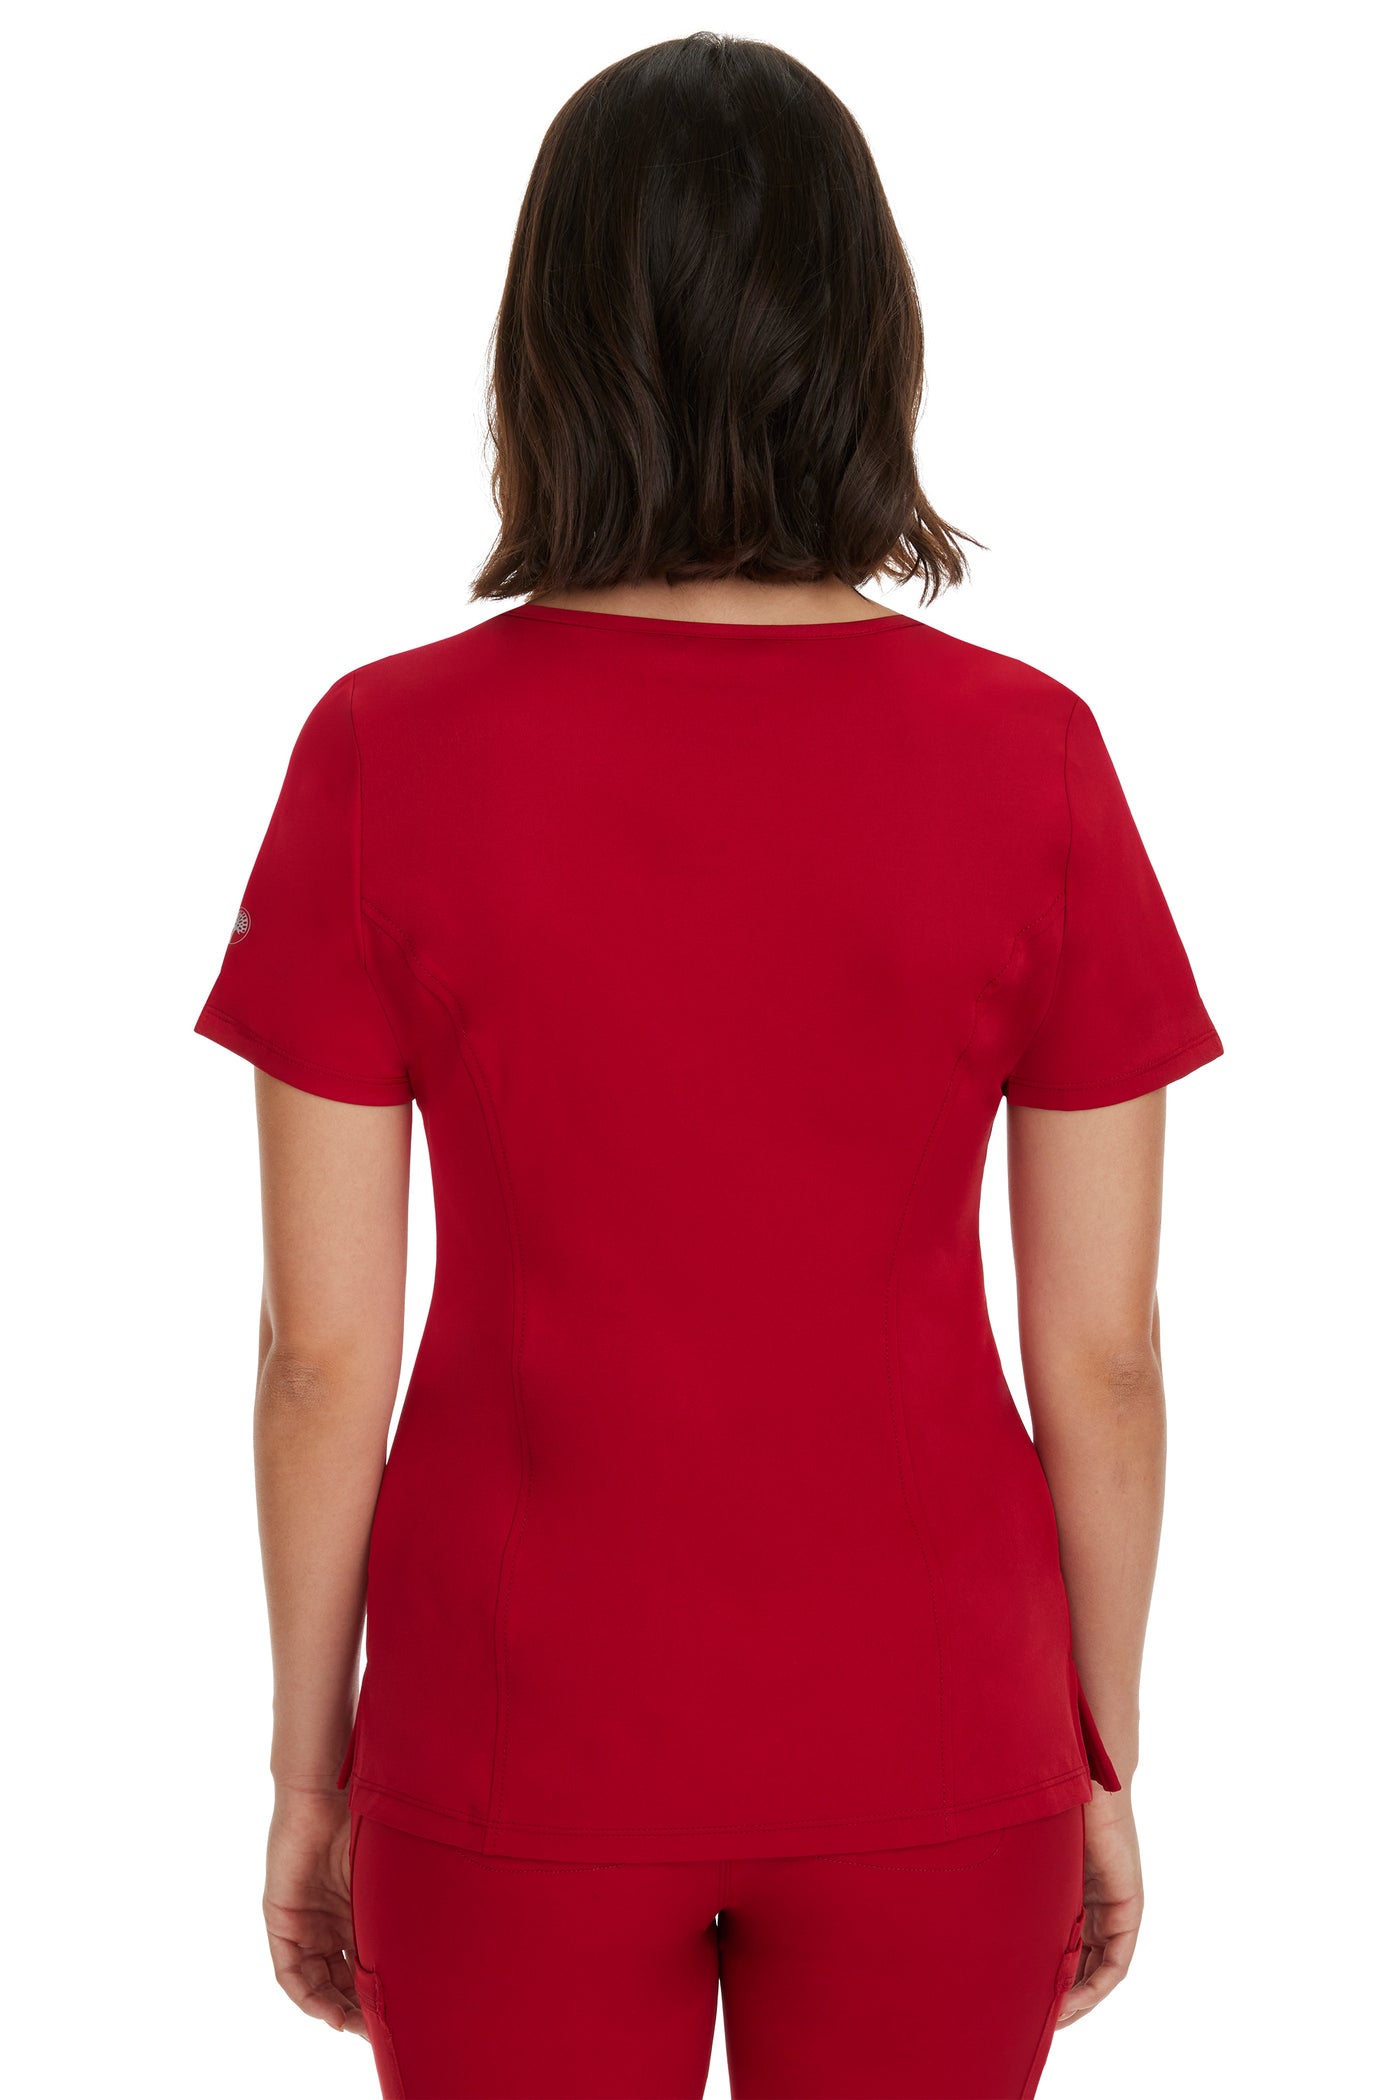 MADISON TOP by Healing Hands XXS-5XL/   RED